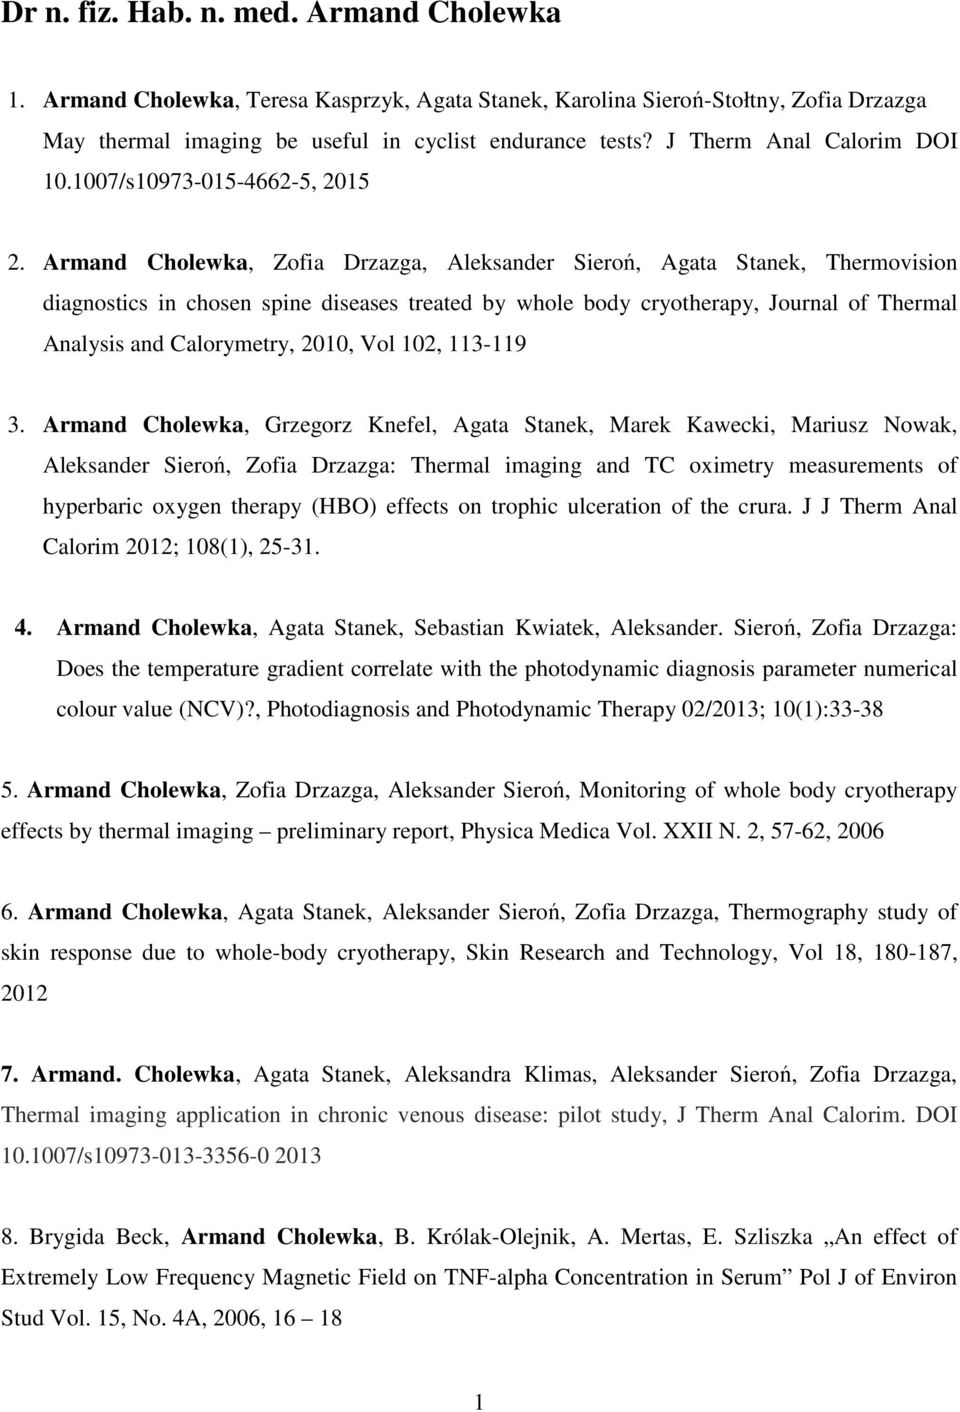 Armand Cholewka, Zofia Drzazga, Aleksander Sieroń, Agata Stanek, Thermovision diagnostics in chosen spine diseases treated by whole body cryotherapy, Journal of Thermal Analysis and Calorymetry,